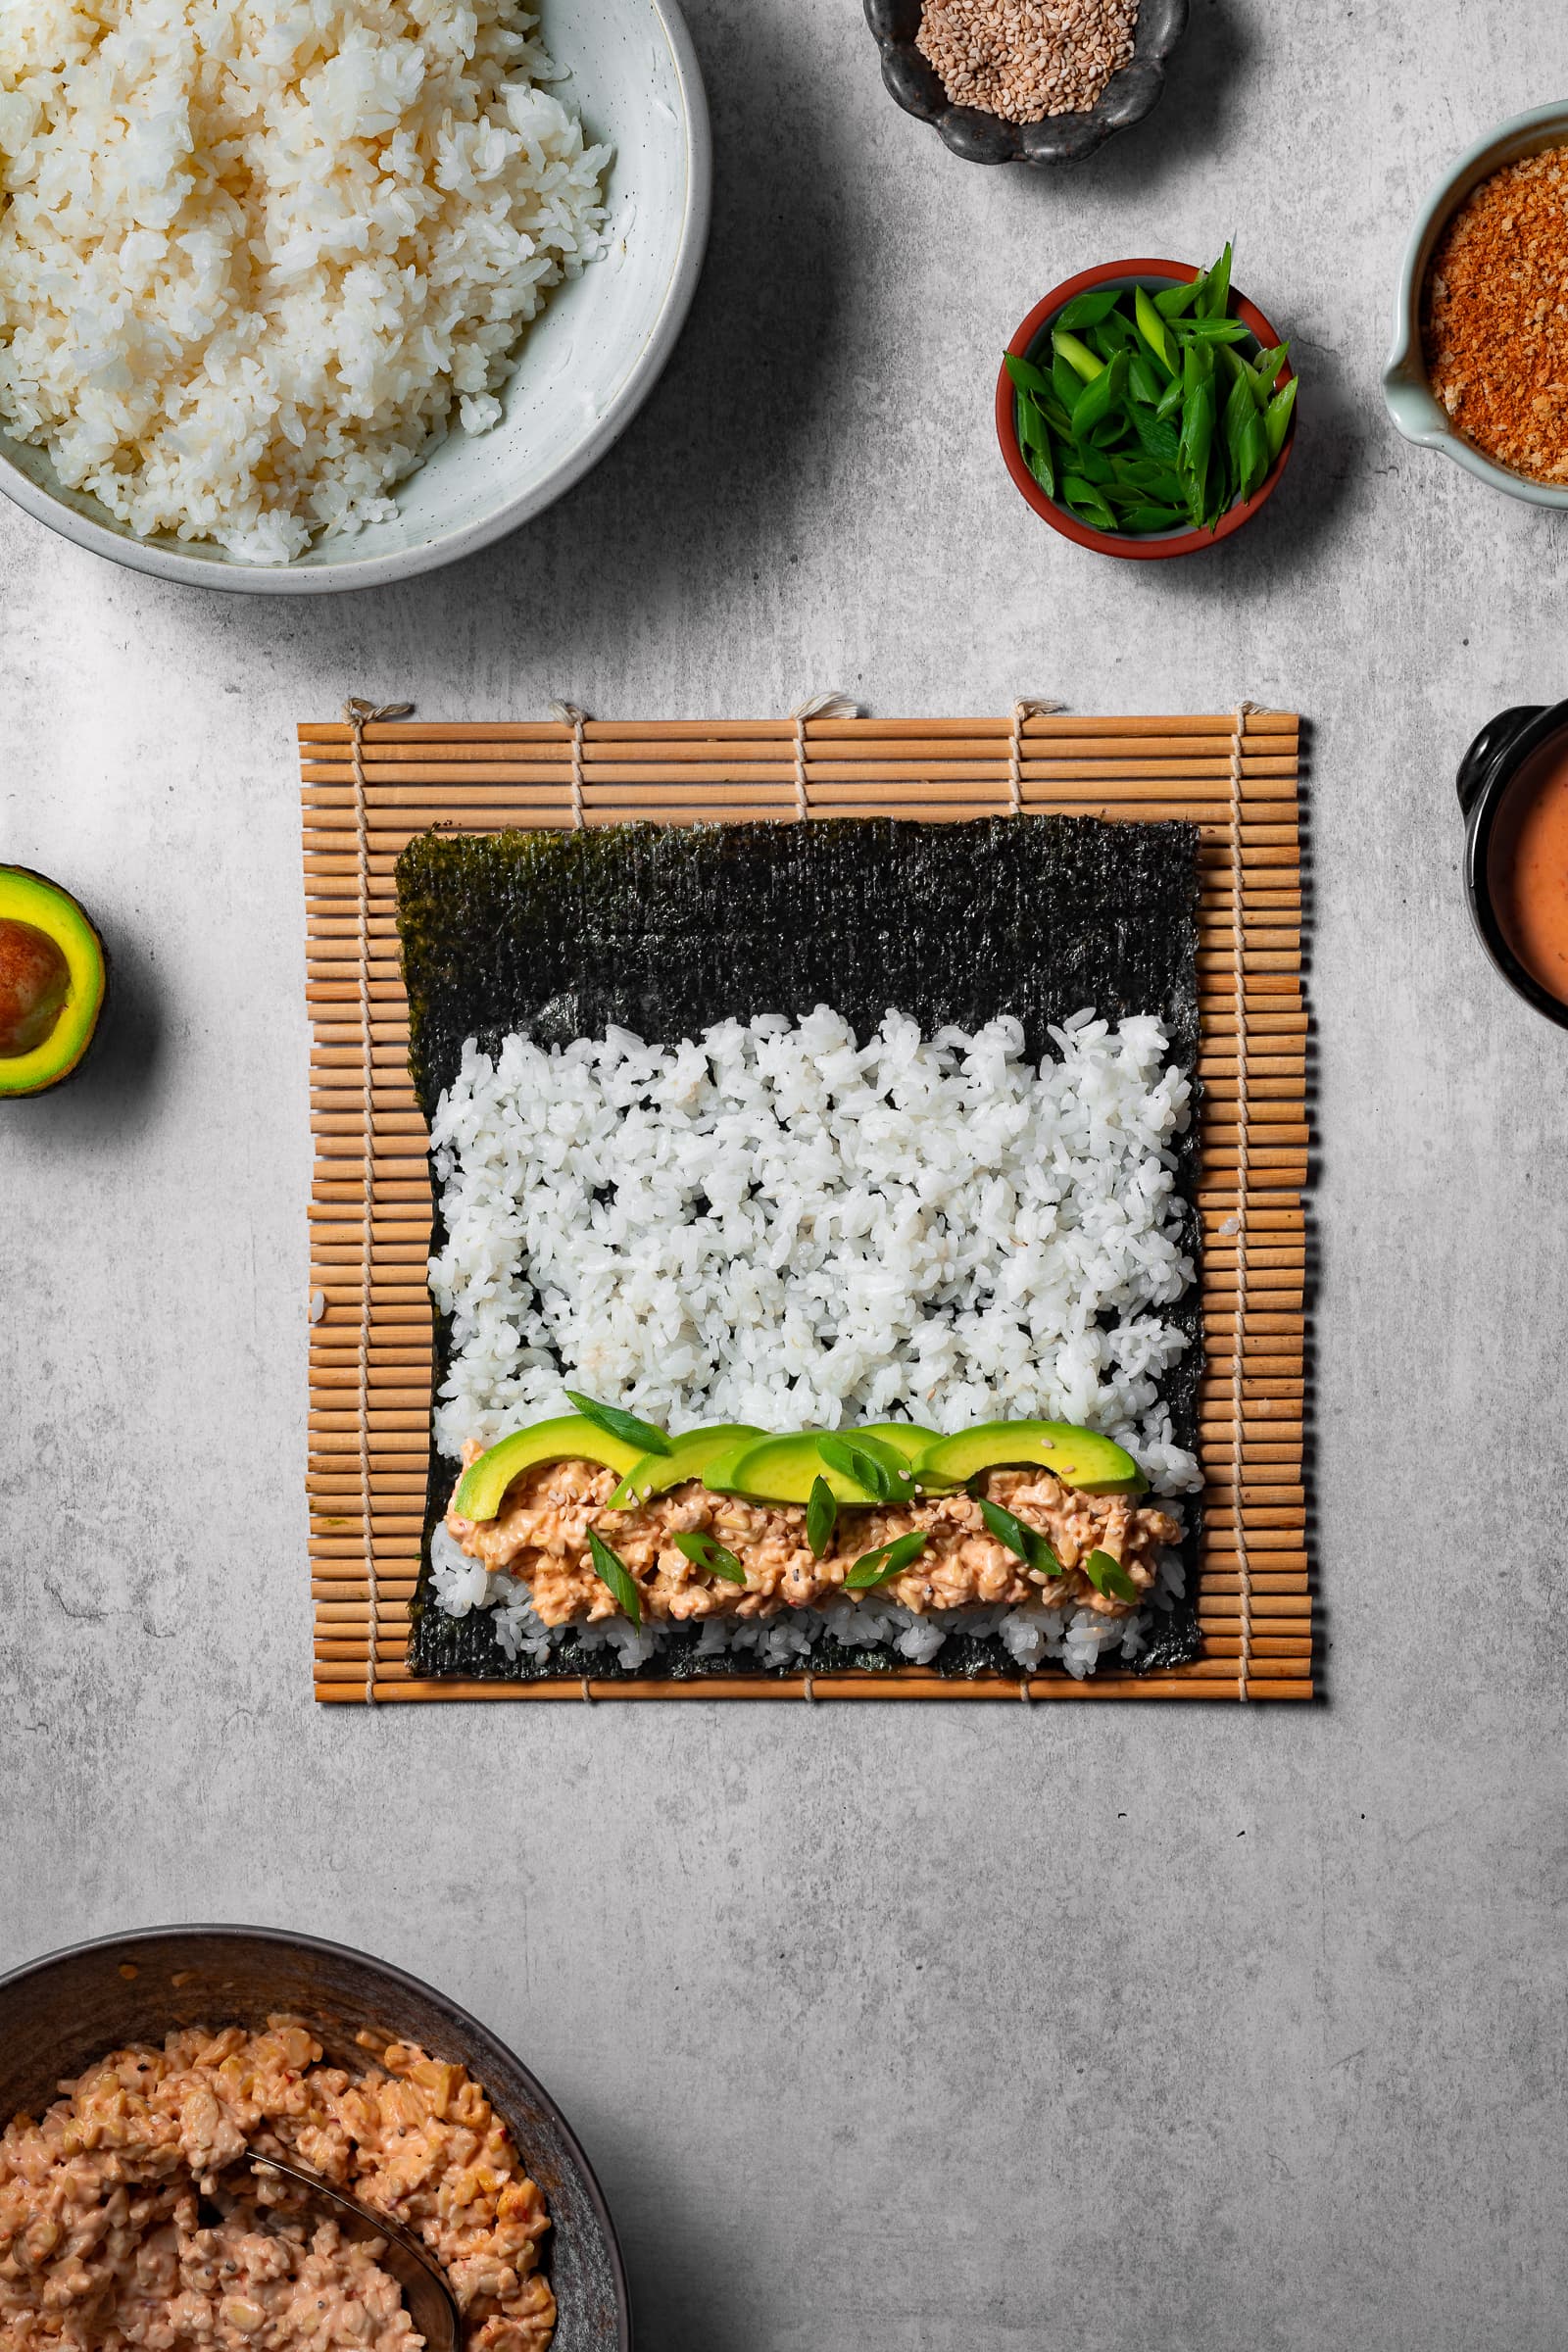 Sushi rice on a sheet of nori with a thin strip of tempeh tuna filling, avocado, and green onions.